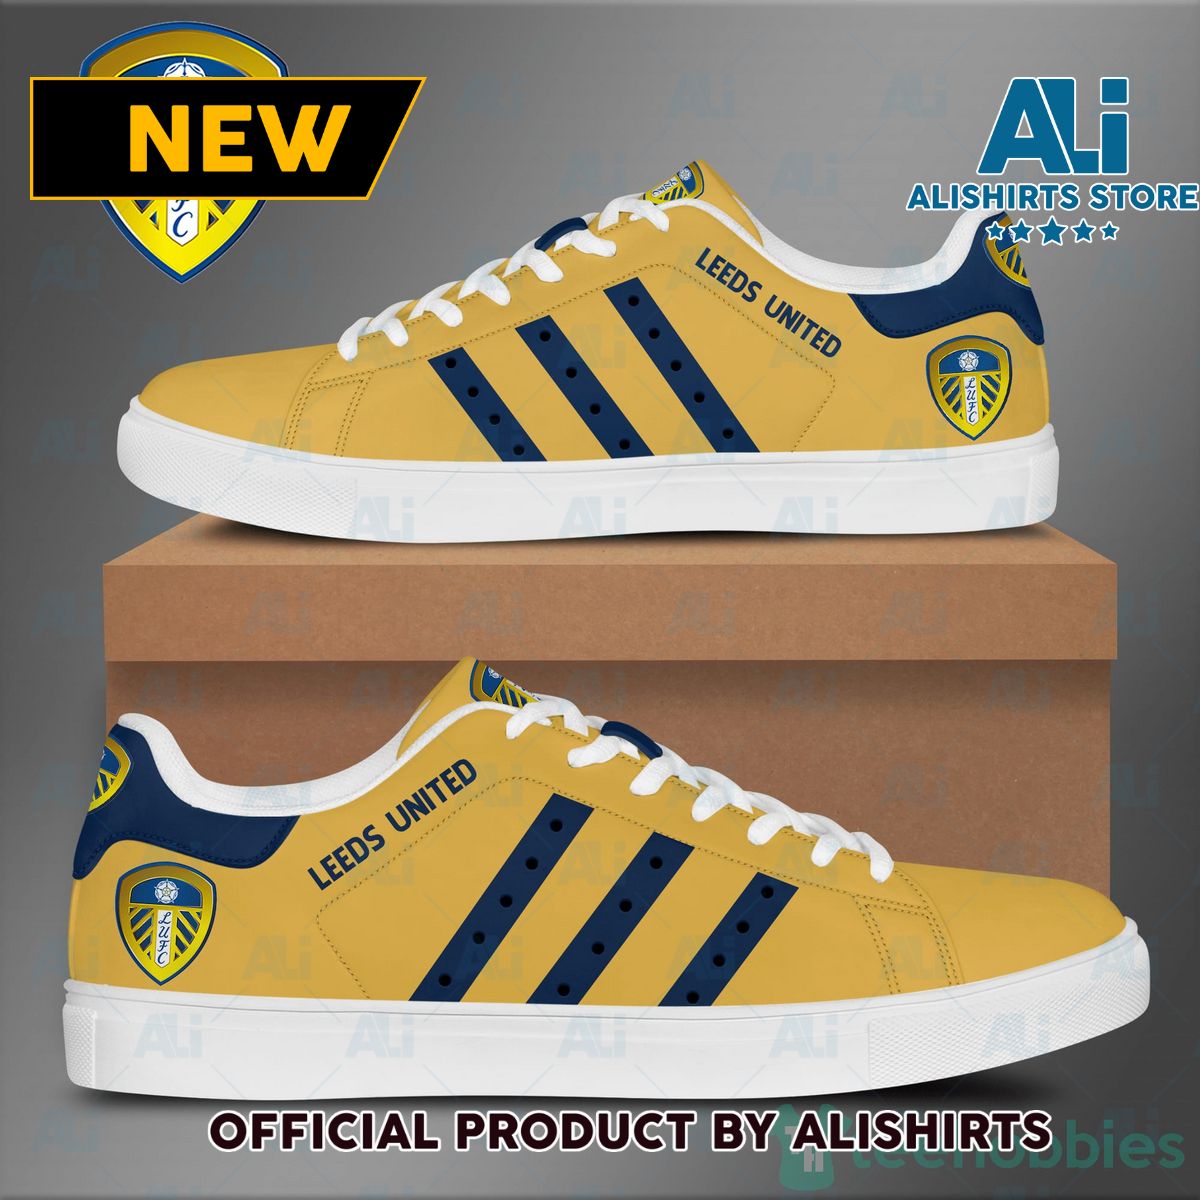 Leeds United Logo Adidas Stan Smith Low Top Skate Shoes